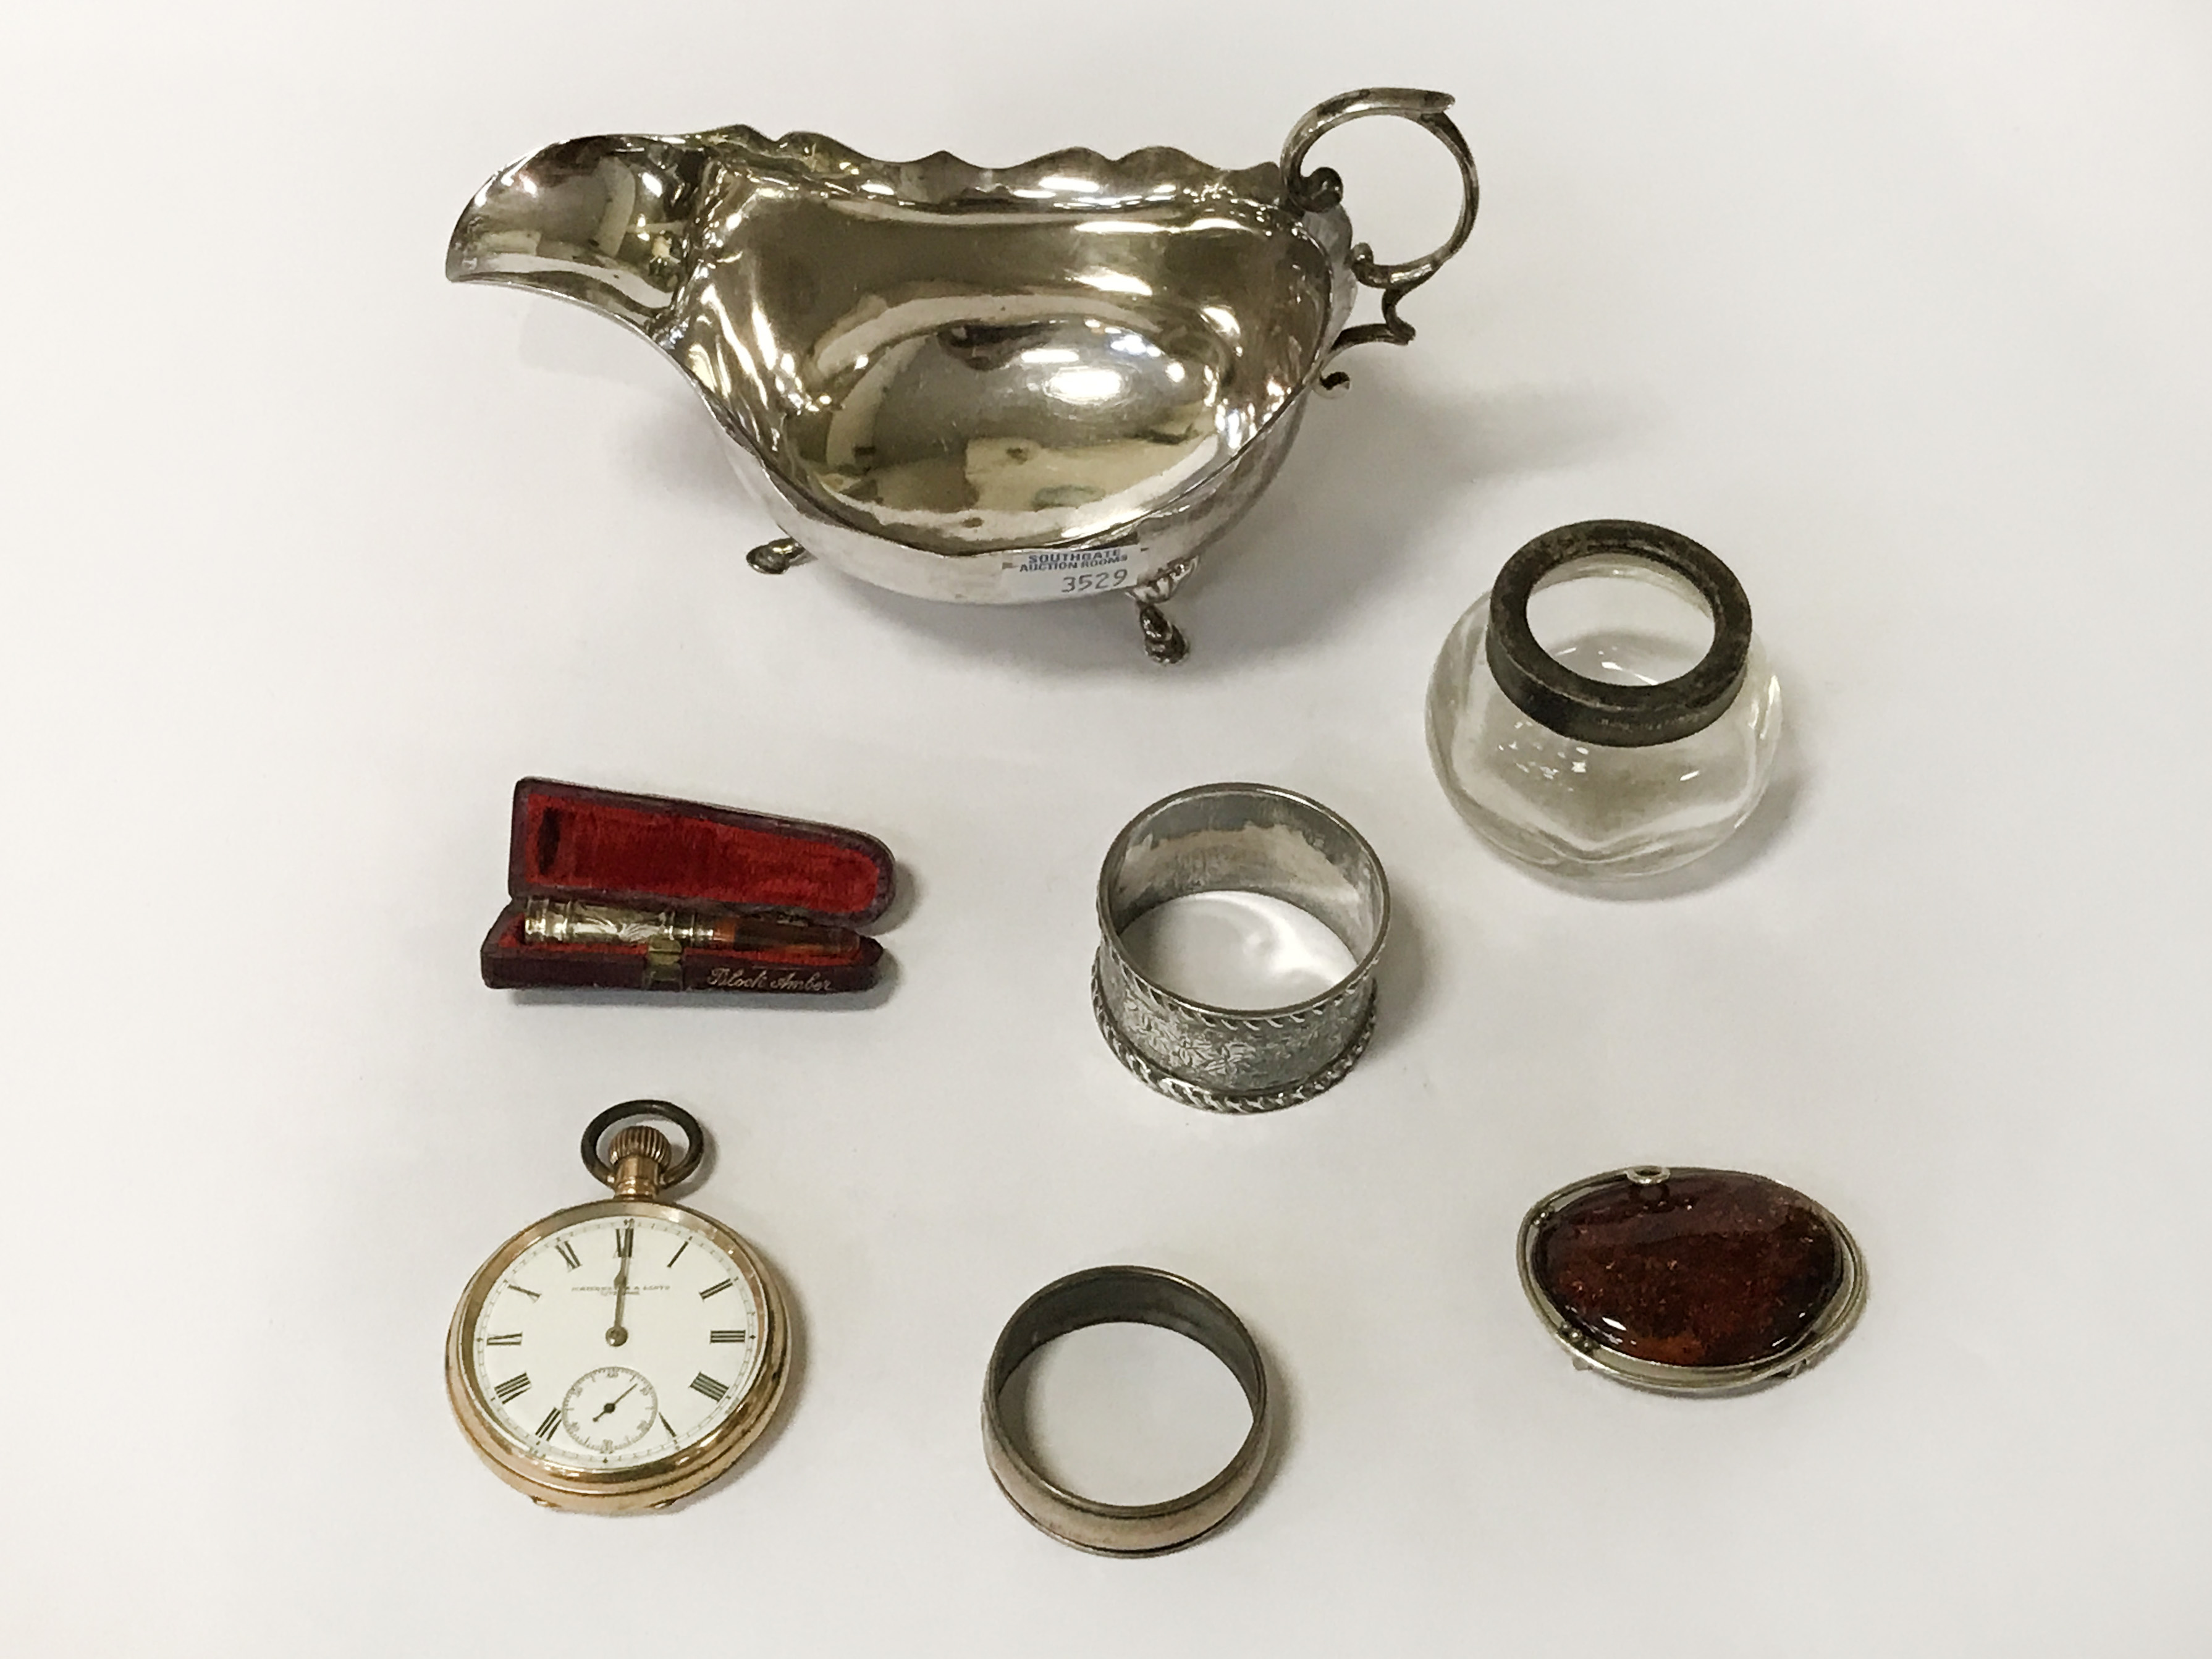 SILVER GRAVY BOAT & OTHER SILVER ITEMS